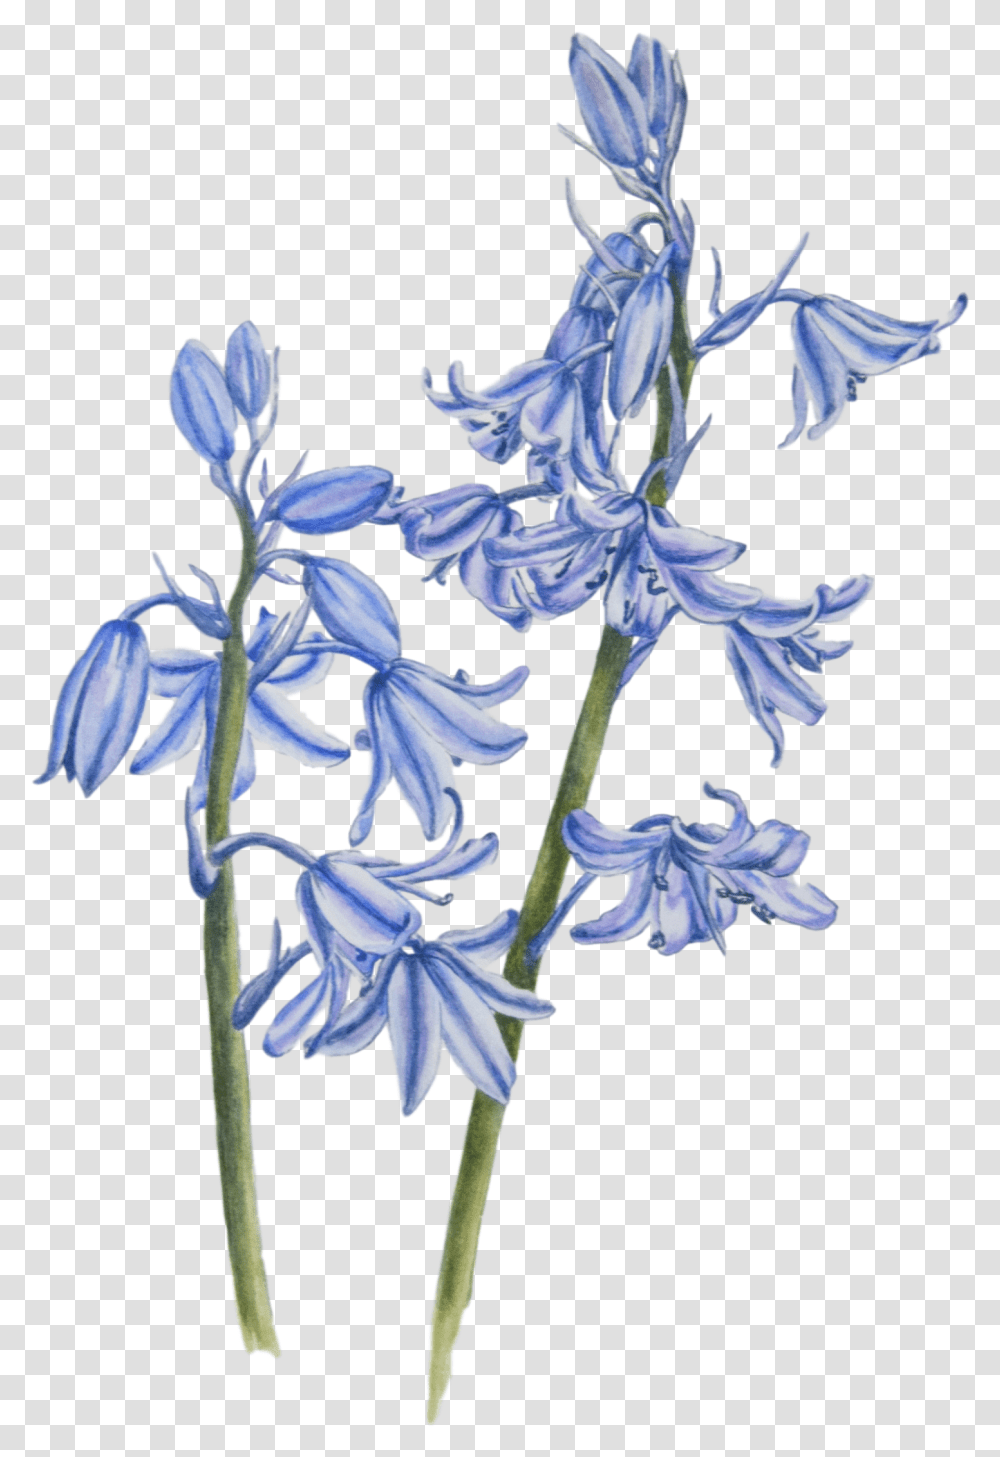 Bluebell Image Background Blue Bell Flower Drawing, Plant, Blossom, Iris, Amaryllidaceae Transparent Png